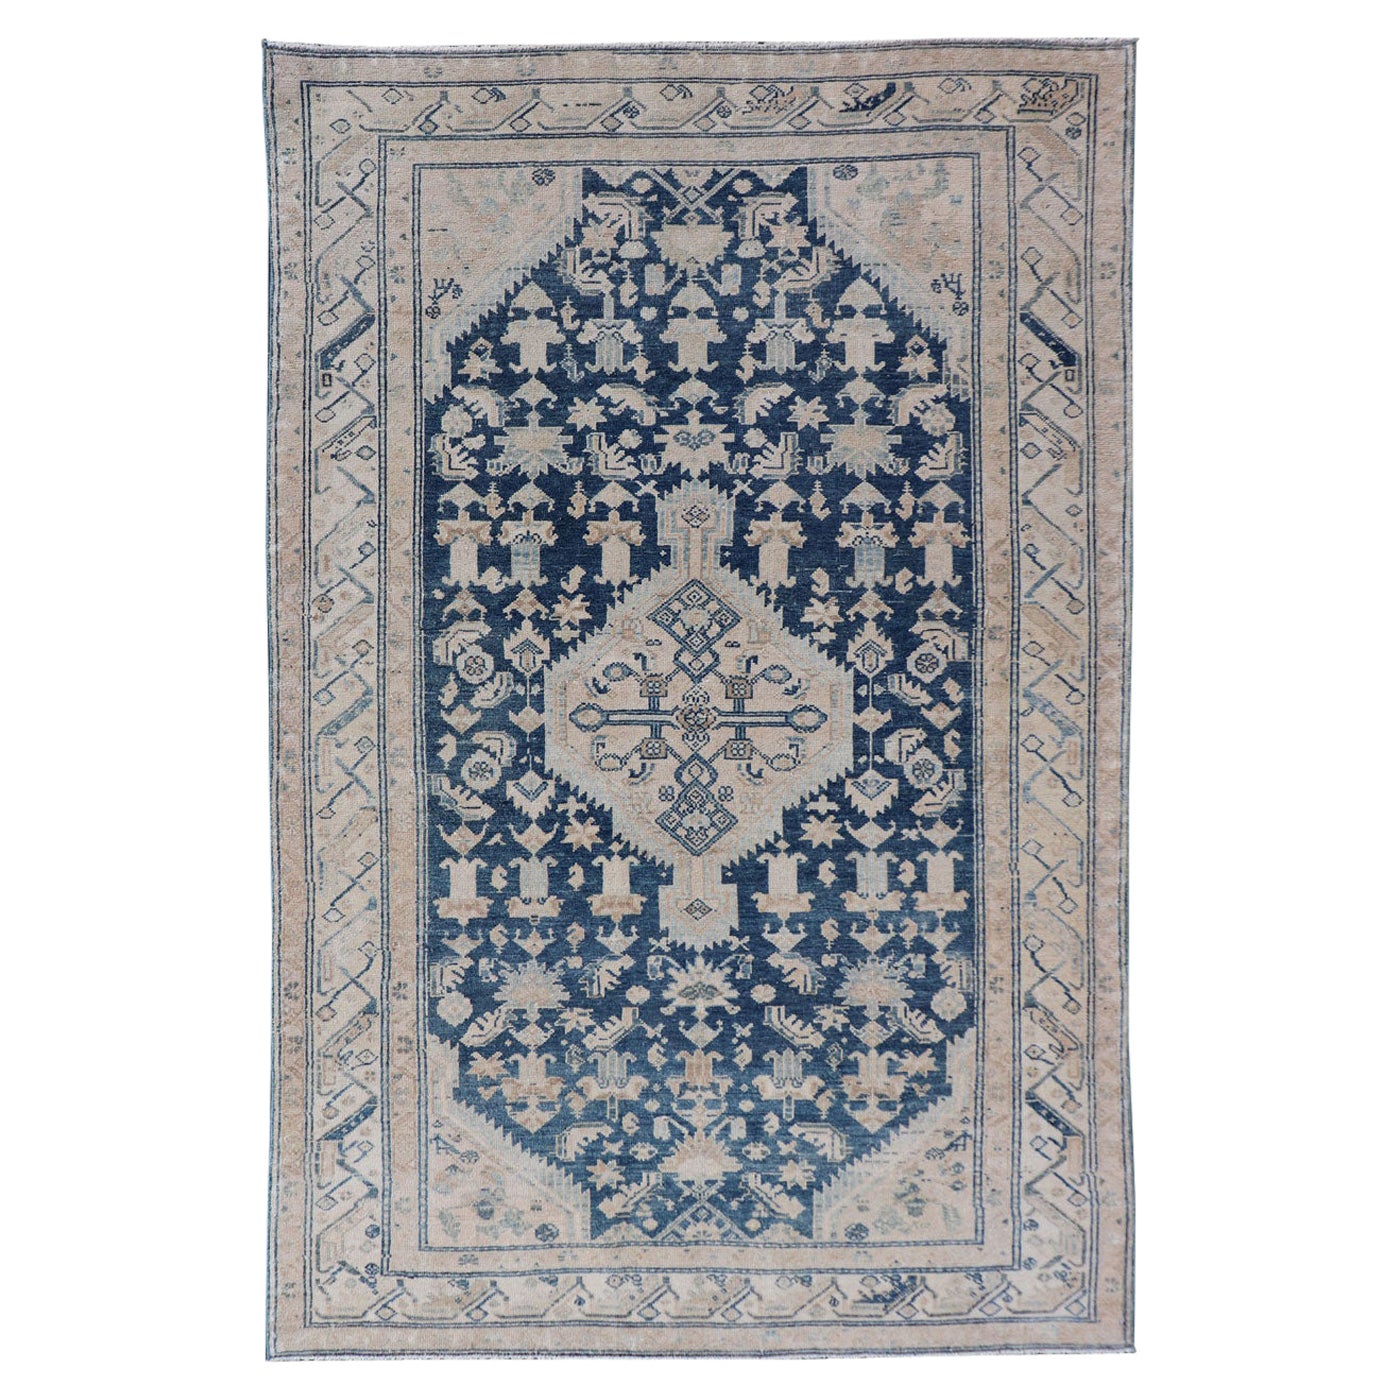 Mid Night Blue Background Antique Persian Hamadan Rug with Taupe & Powder Blue